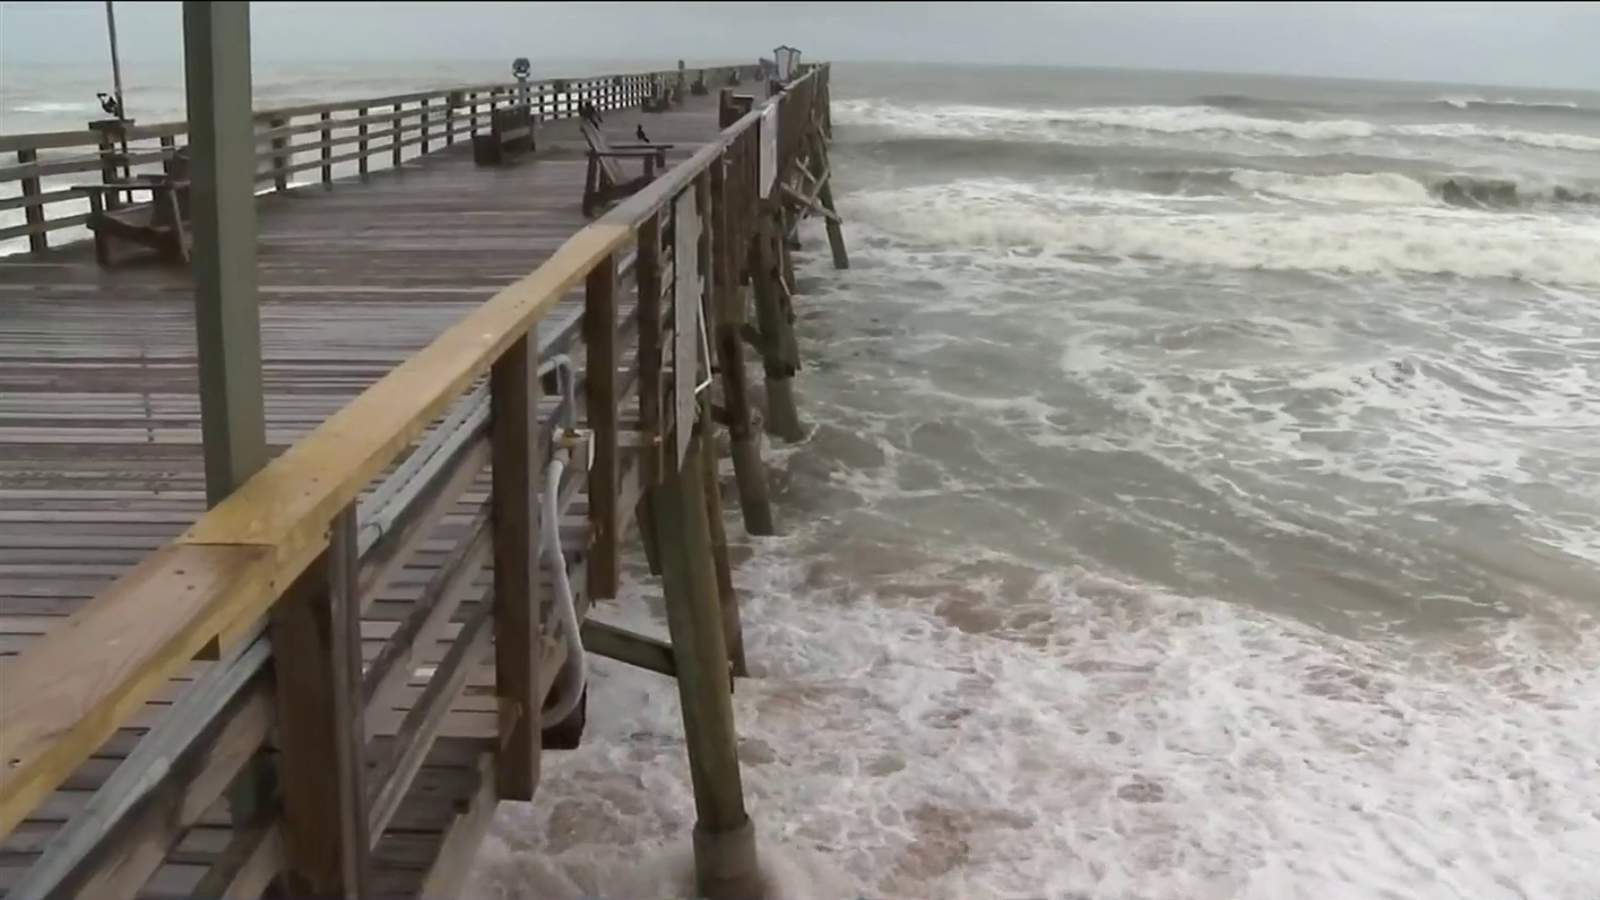 Flagler Beach Pier, rebuilt A1A weather Tropical Storm Isaias with little damage